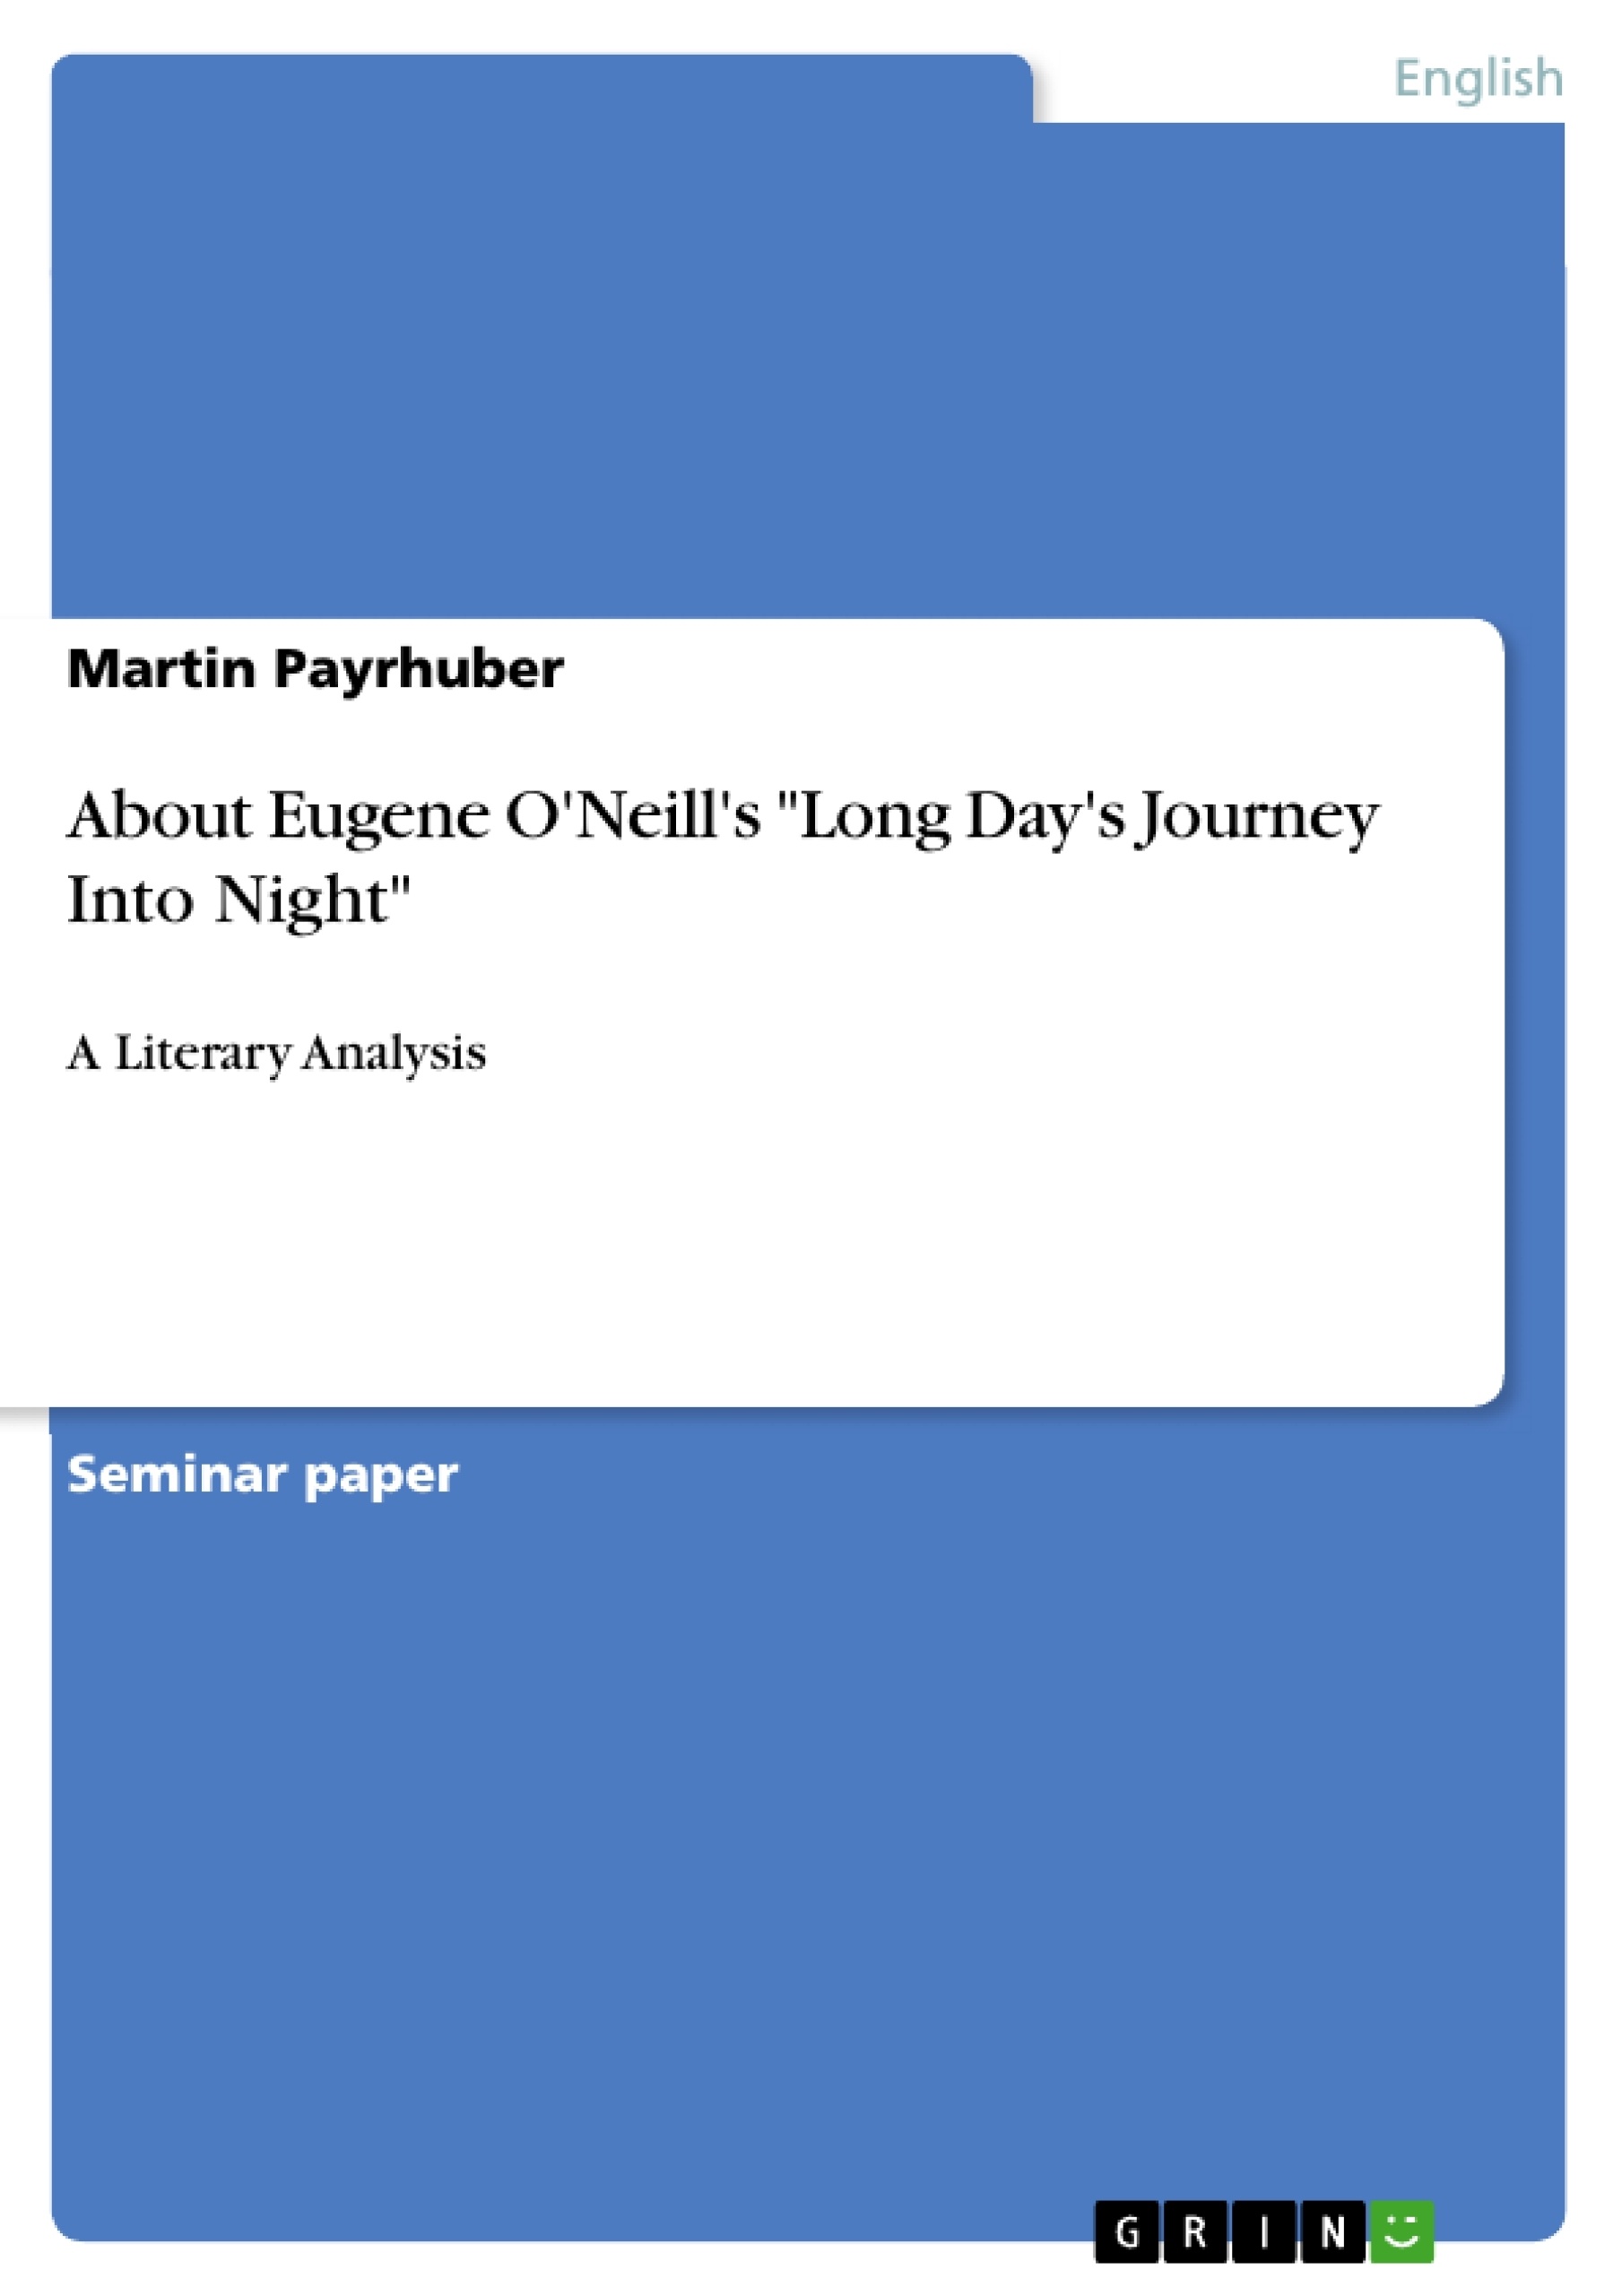 Title: About Eugene O'Neill's "Long Day's Journey Into Night"